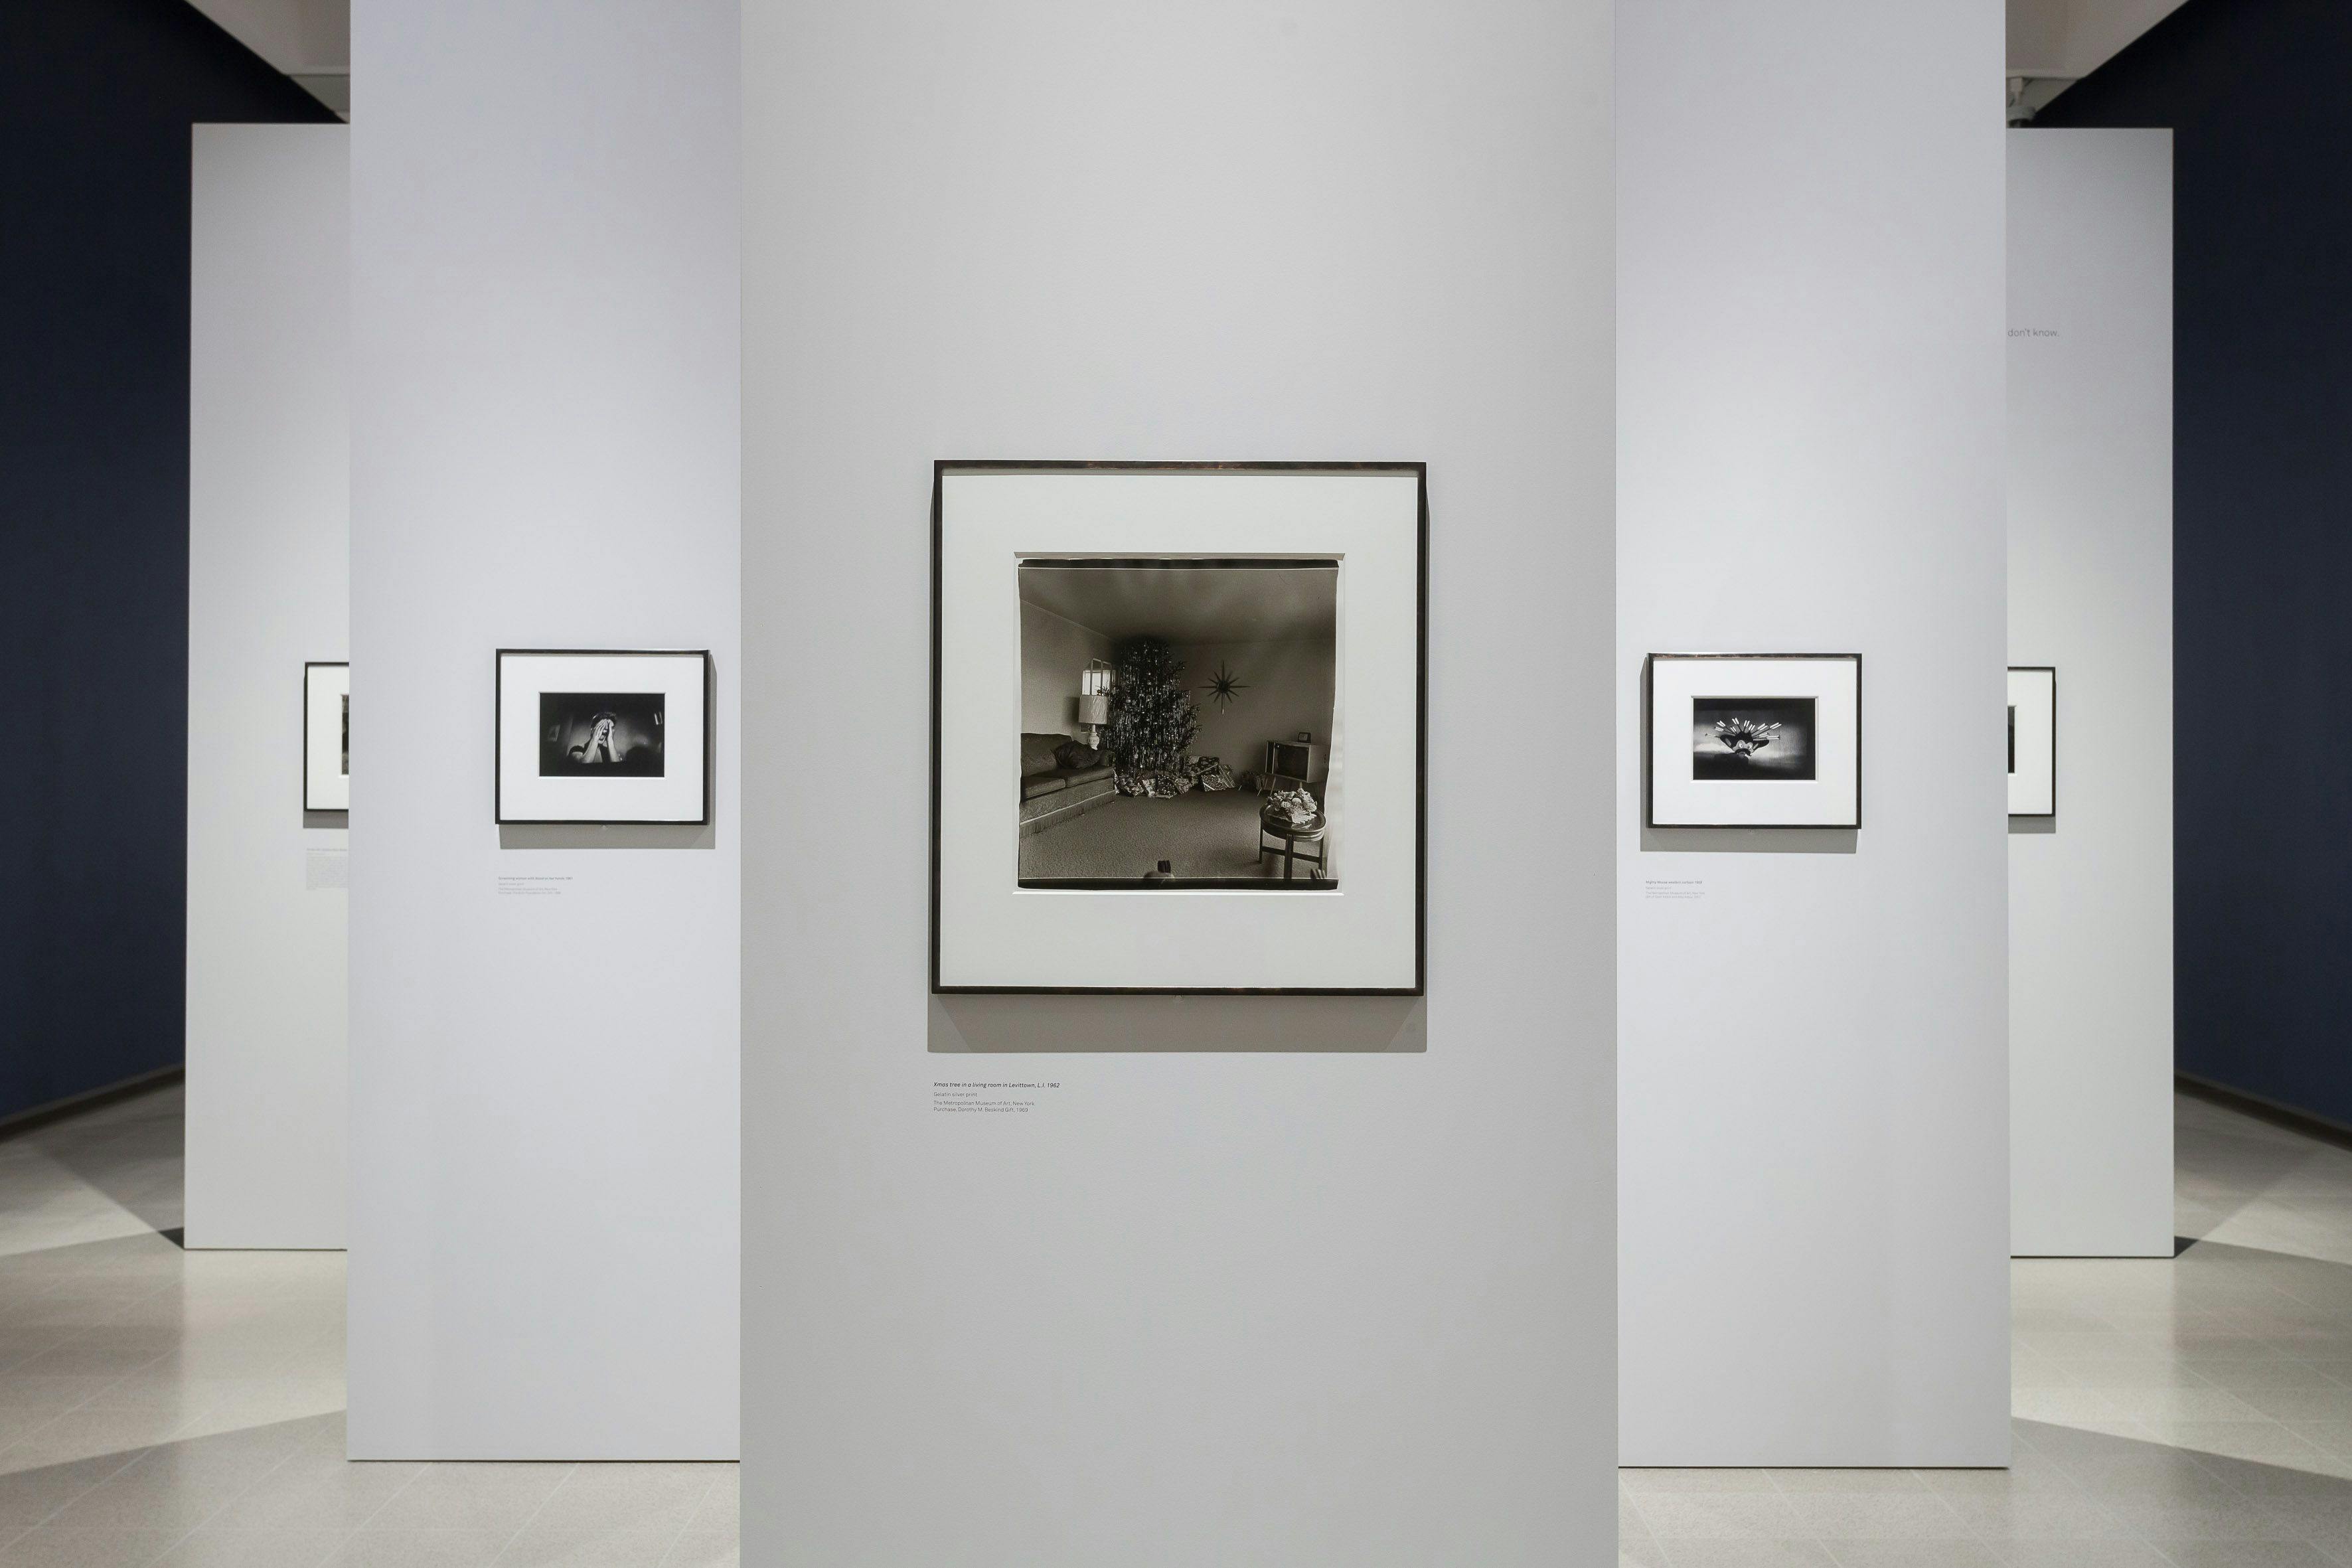 Installation view of the exhibition titled diane arbus: in the beginning at the Hayward Gallery in London, dated 2019.